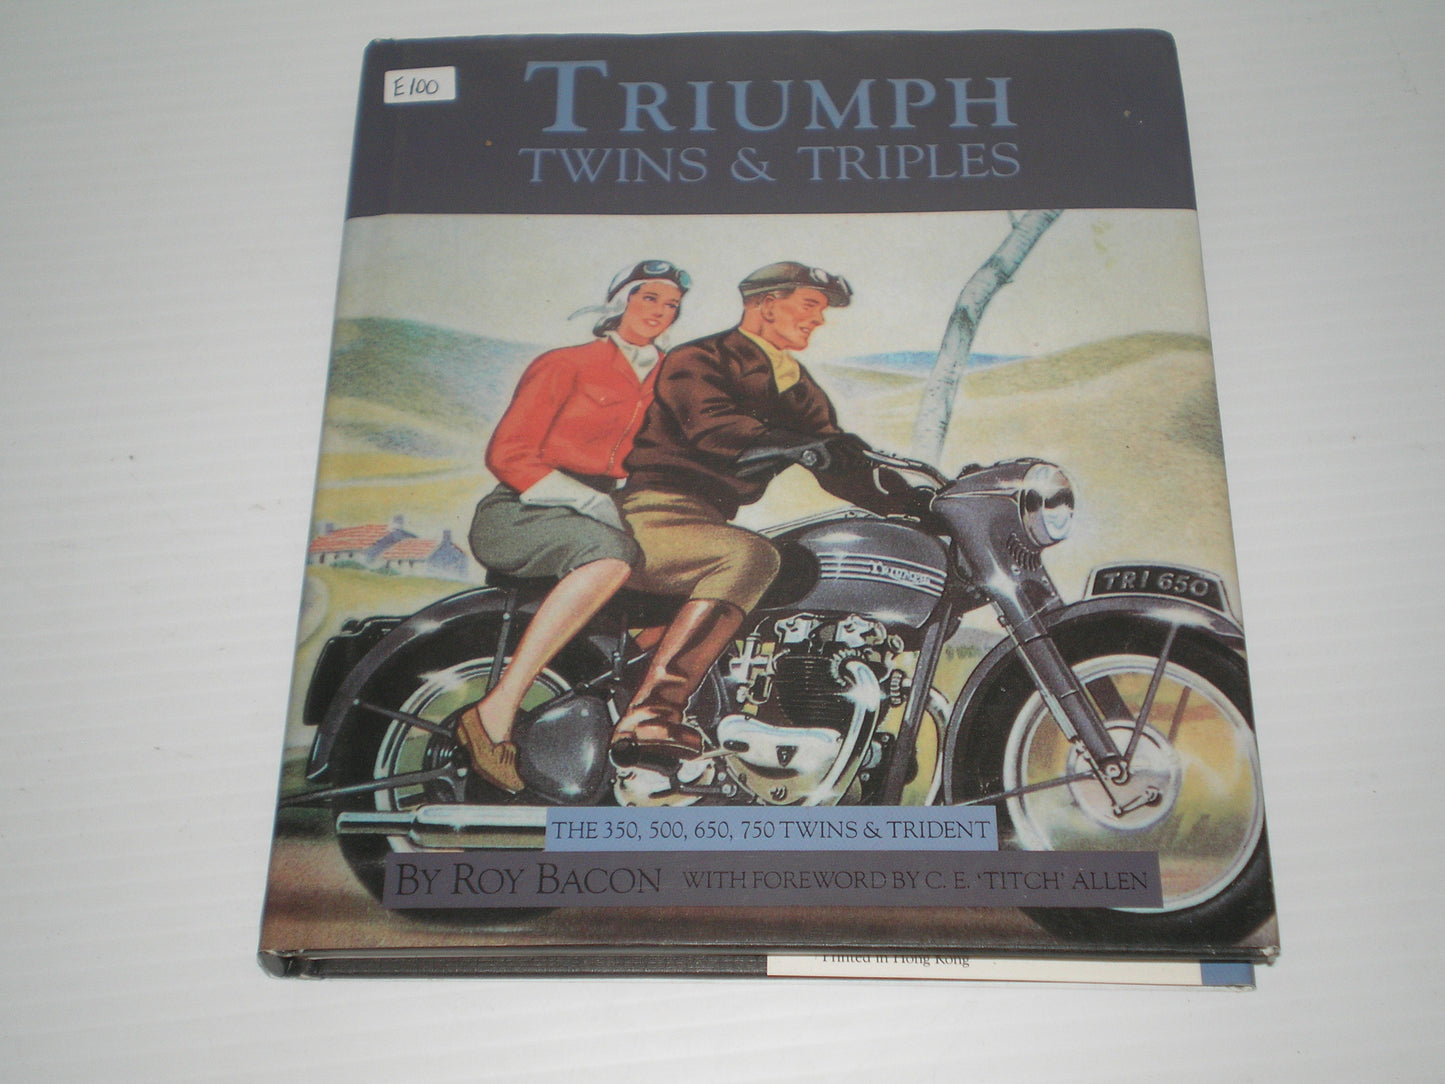 TRIUMPH 350 500 650 750 Twins & Trident Book by Roy Bacon #E100